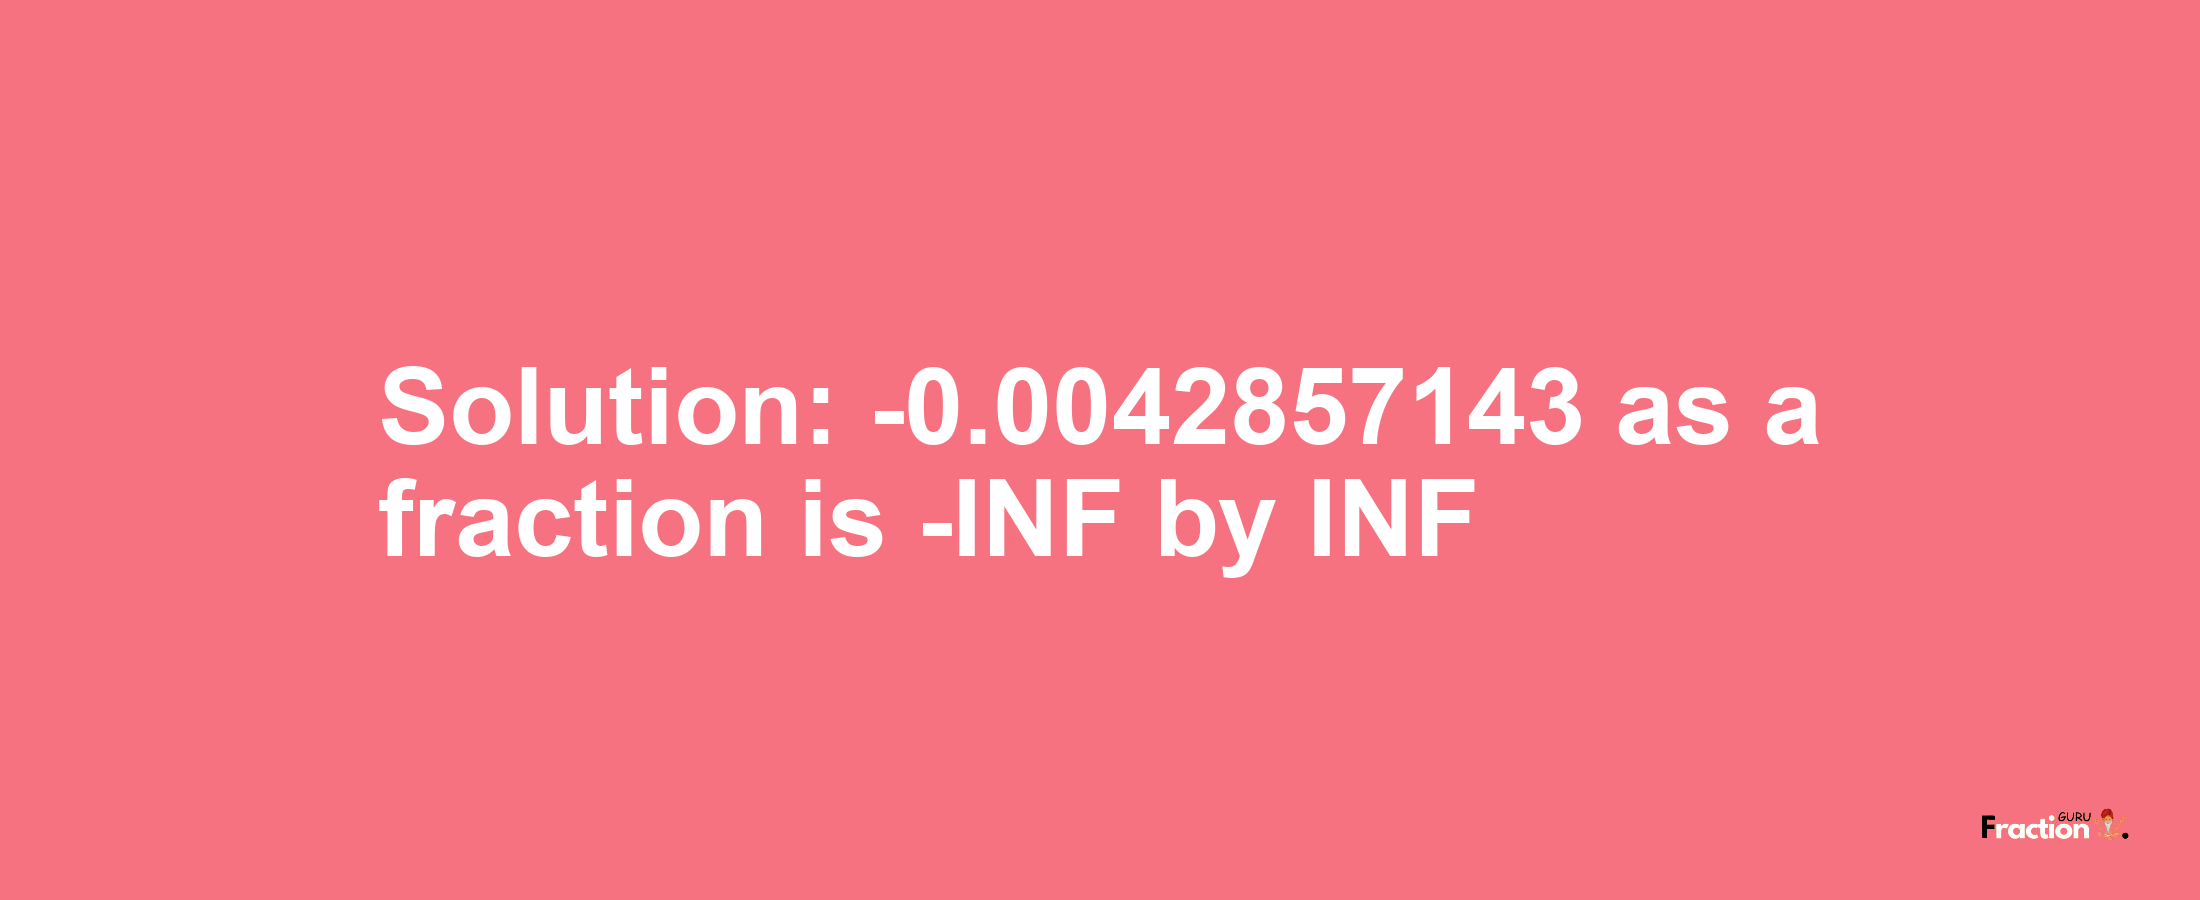 Solution:-0.0042857143 as a fraction is -INF/INF